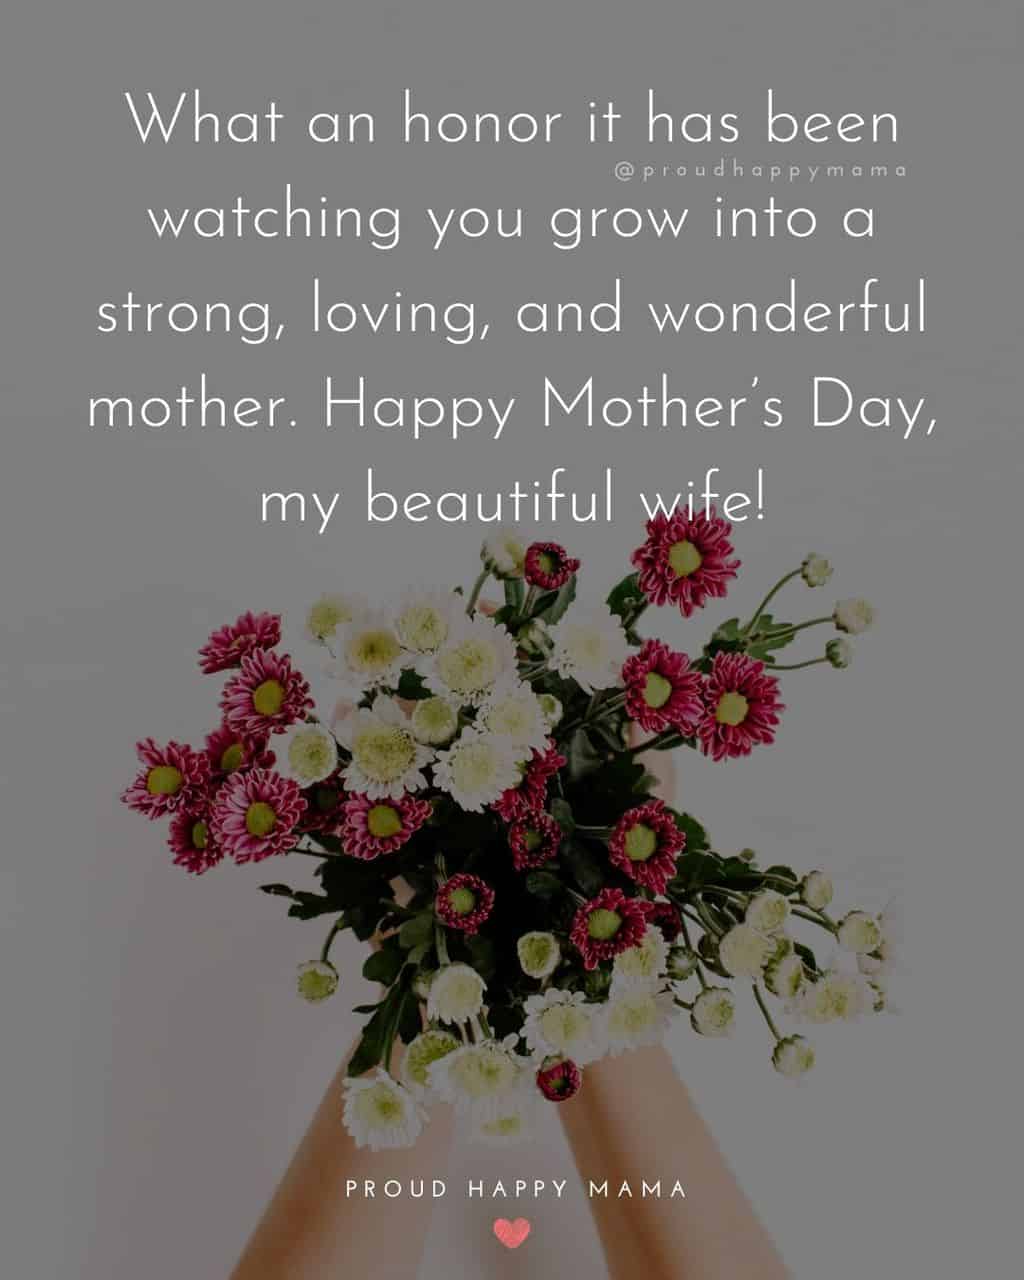 Happy Mothers Day Quotes For Wife - What an honor it has been watching you grow into a strong, loving, and wonderful